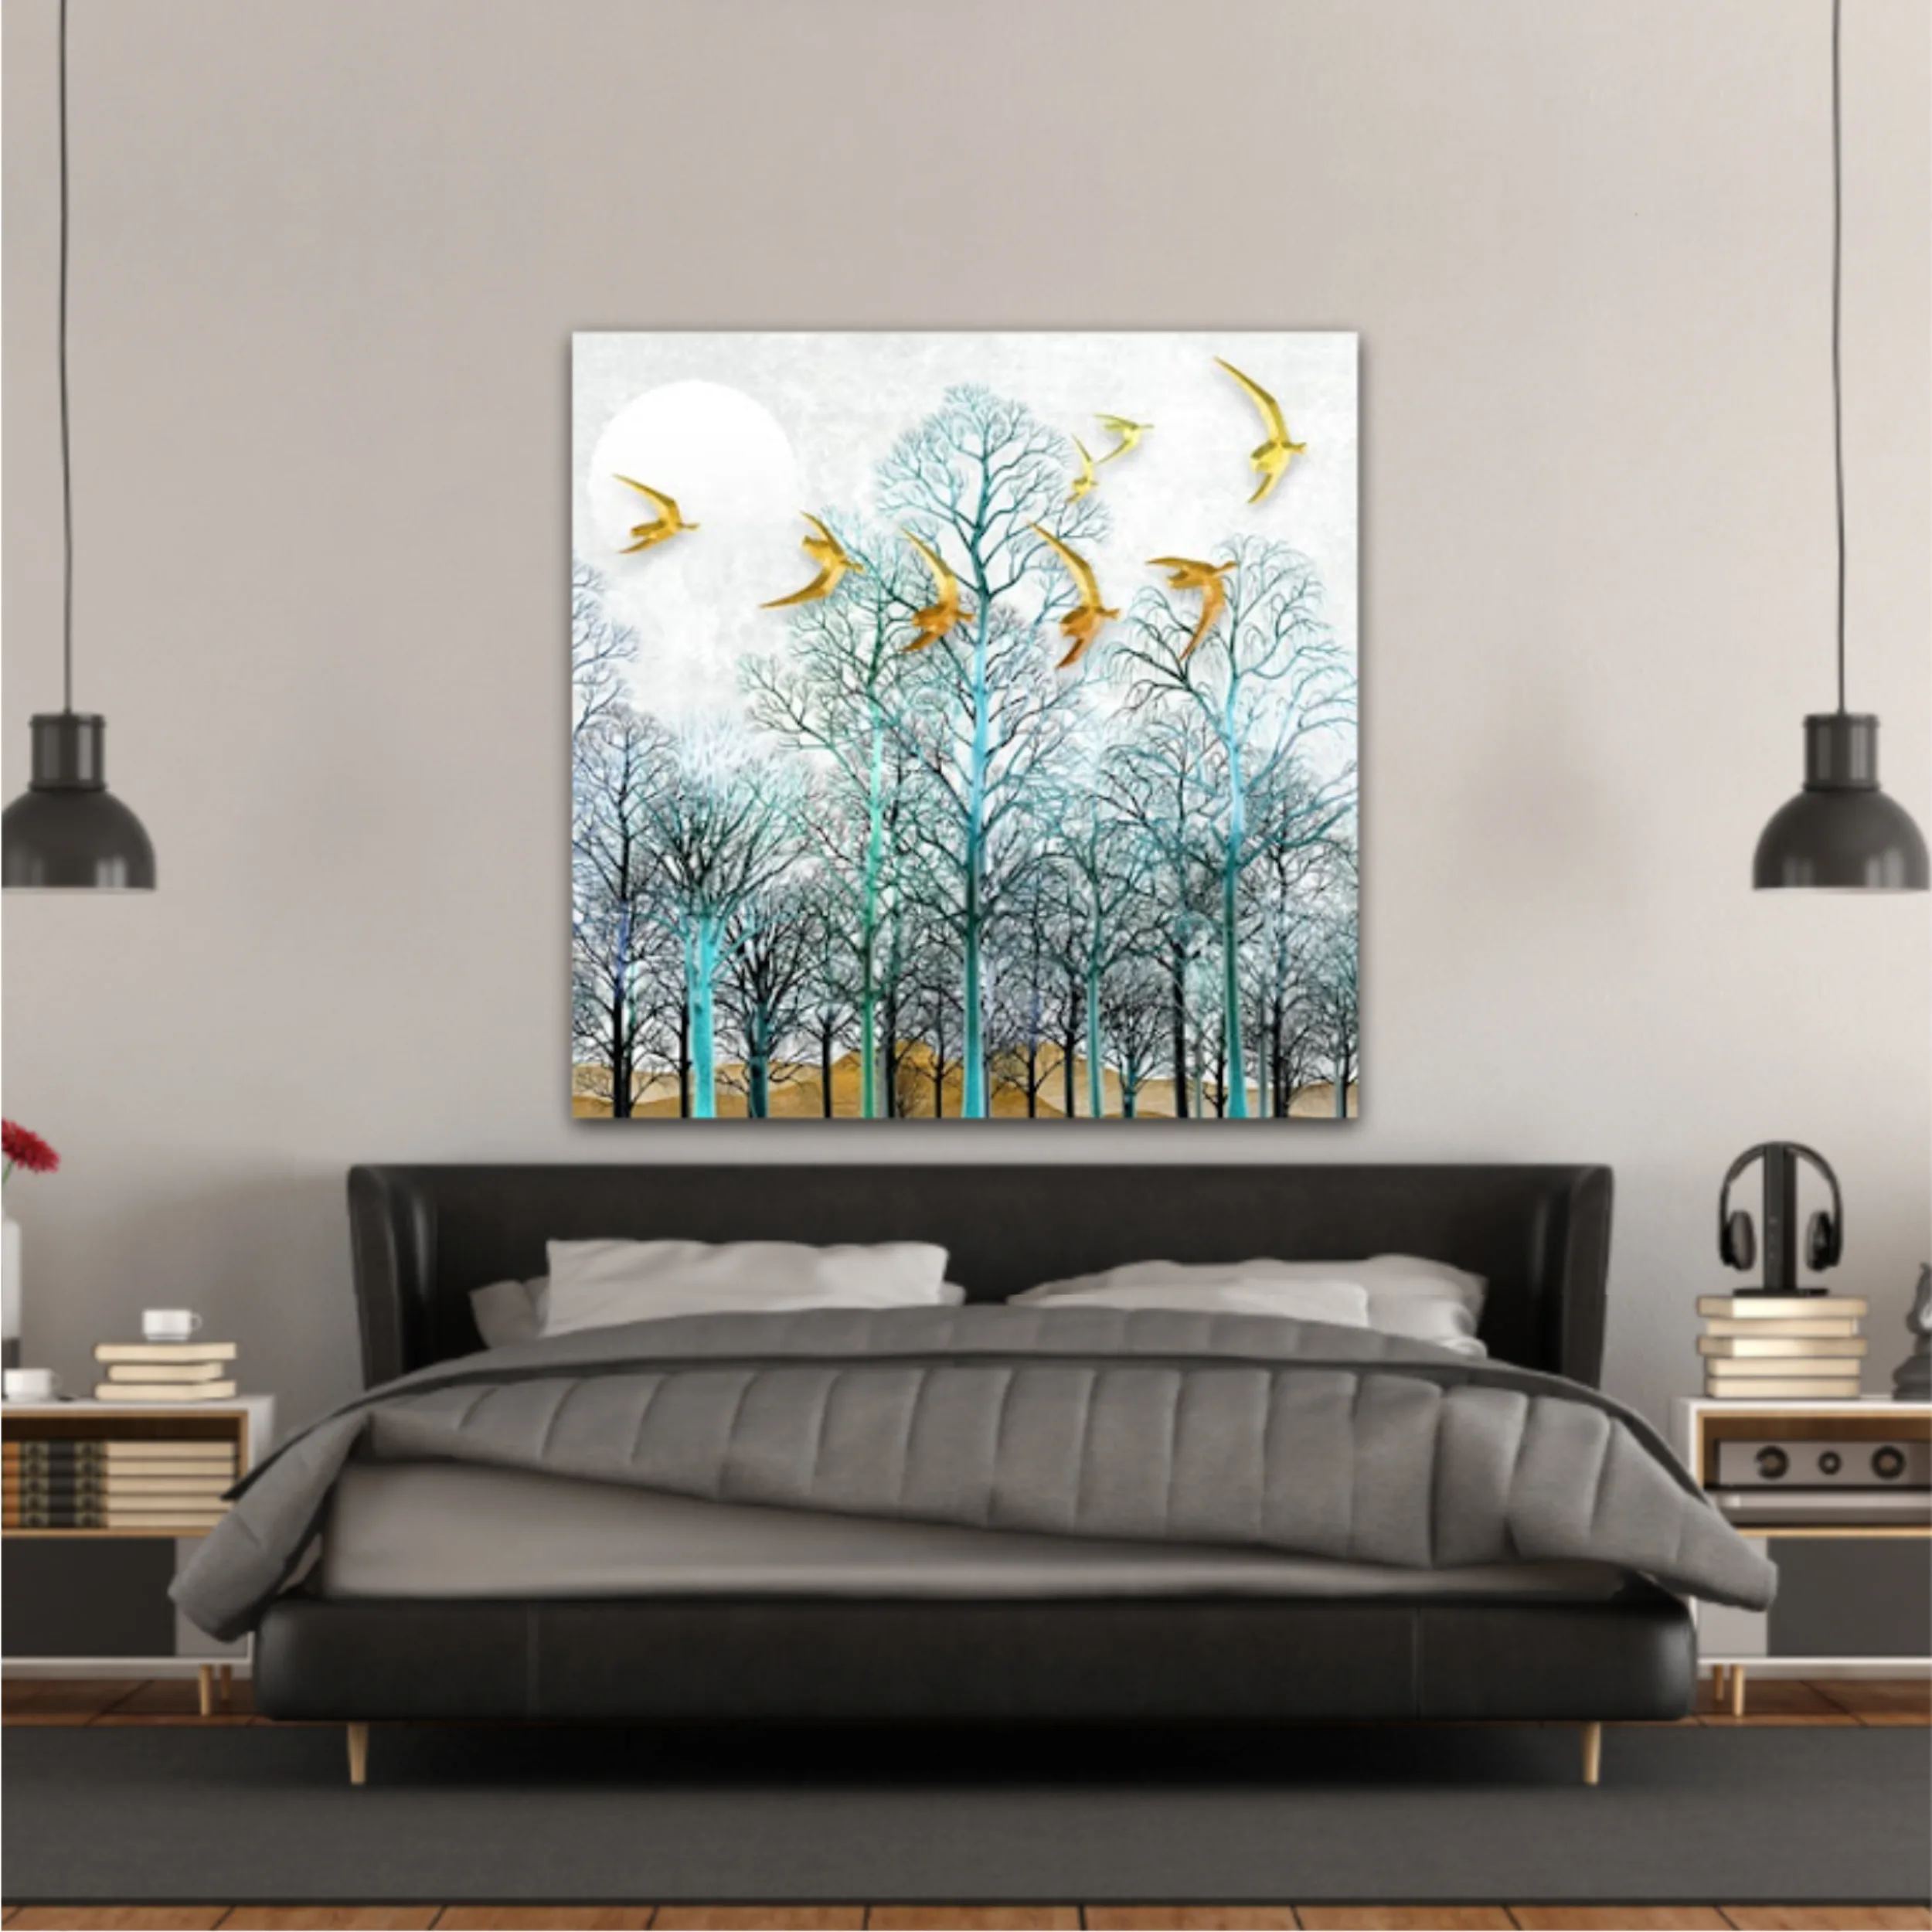 3d illustration of forest at night